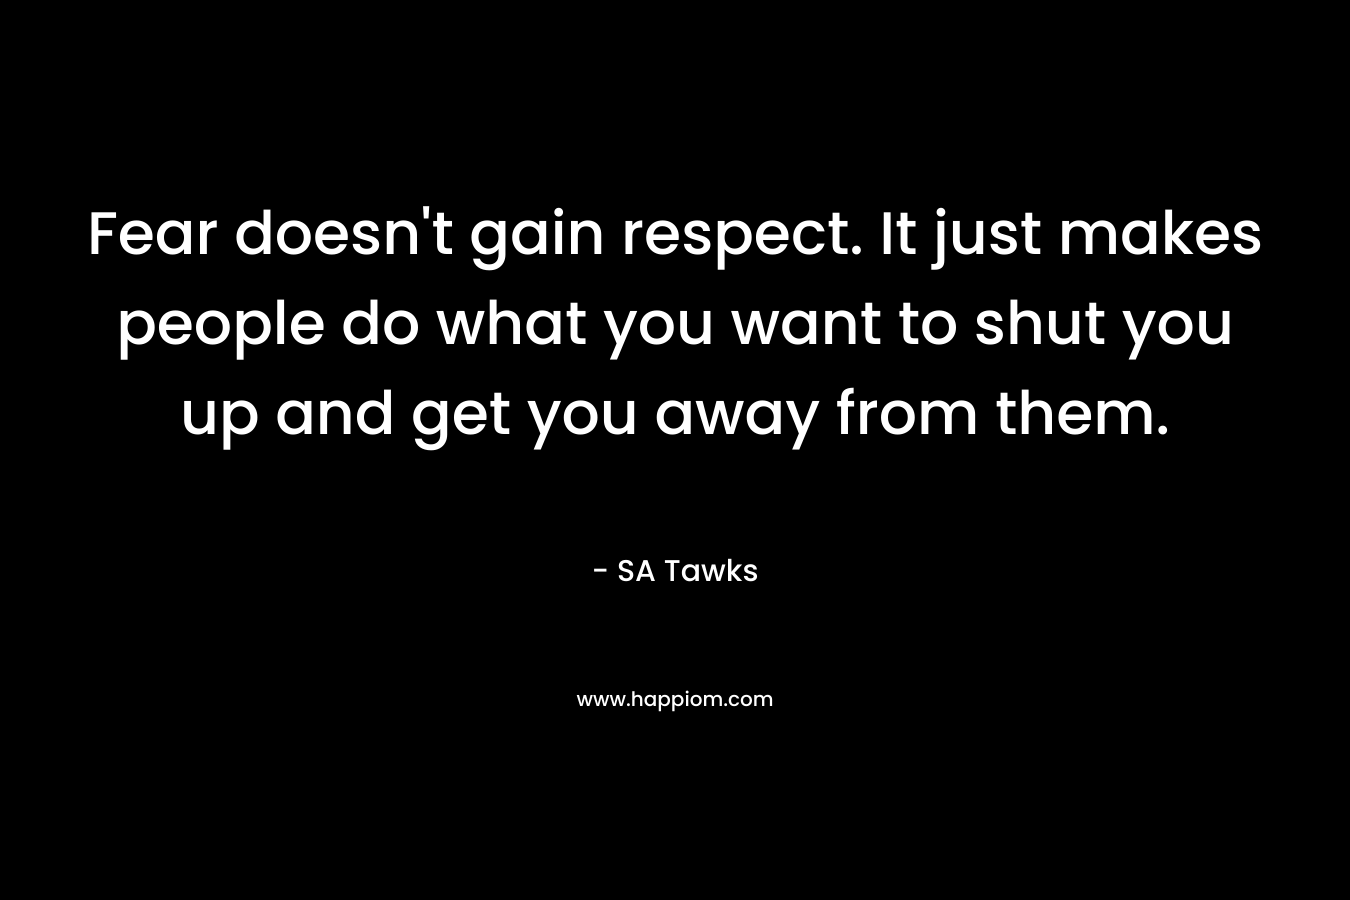 Fear doesn't gain respect. It just makes people do what you want to shut you up and get you away from them.